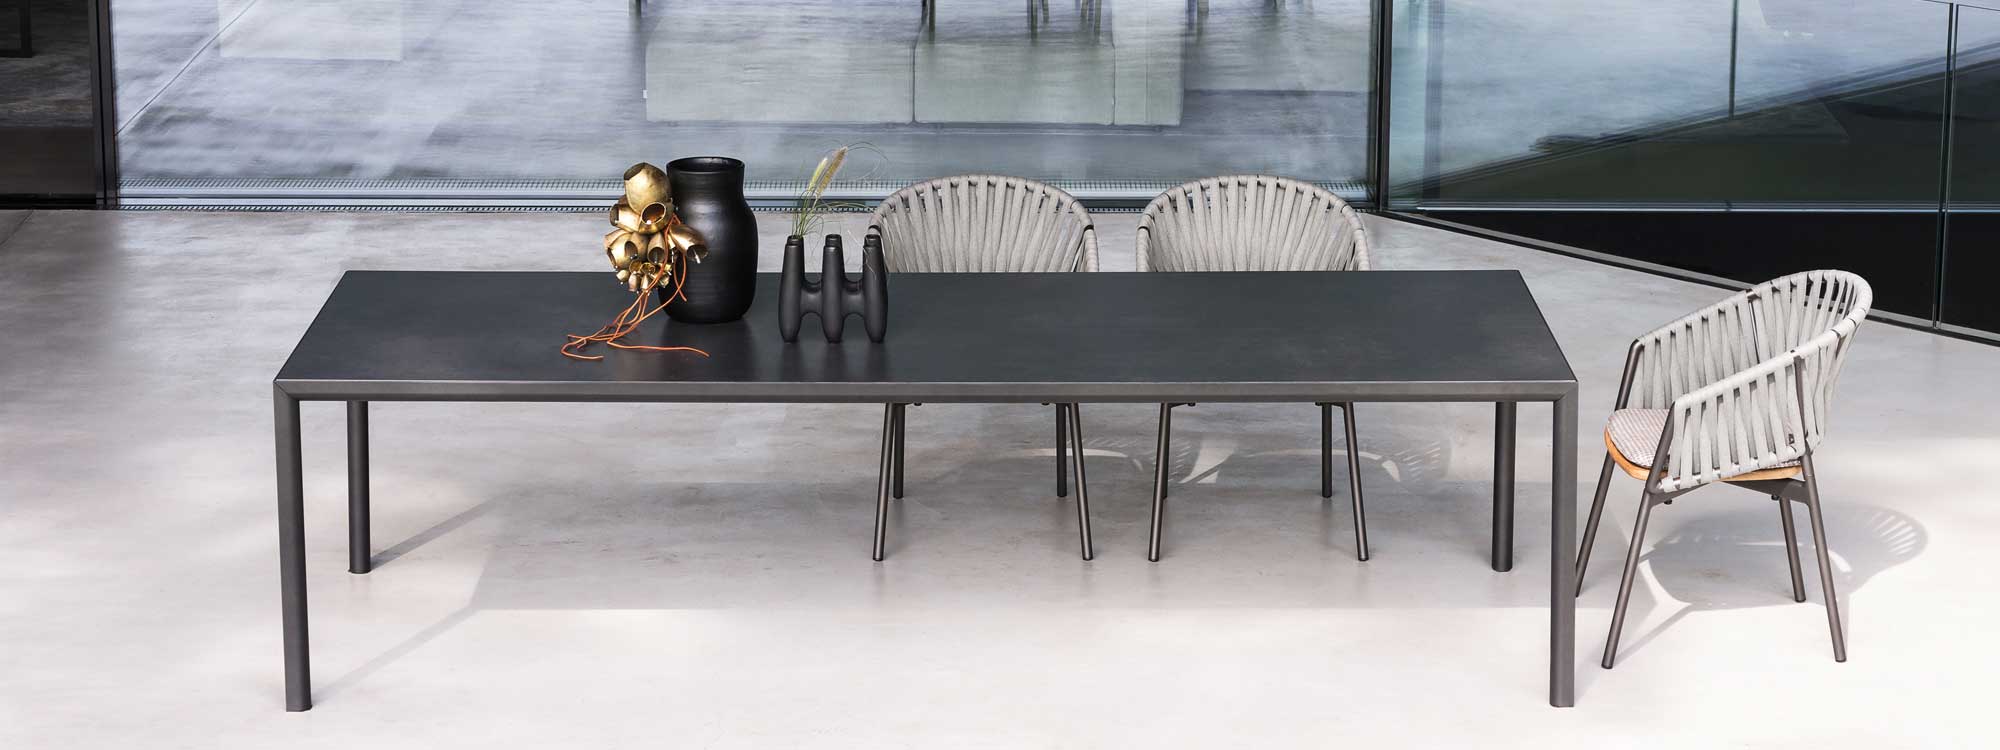 Plein Air outdoor table with Piper comfort chairs on polished concrete floor